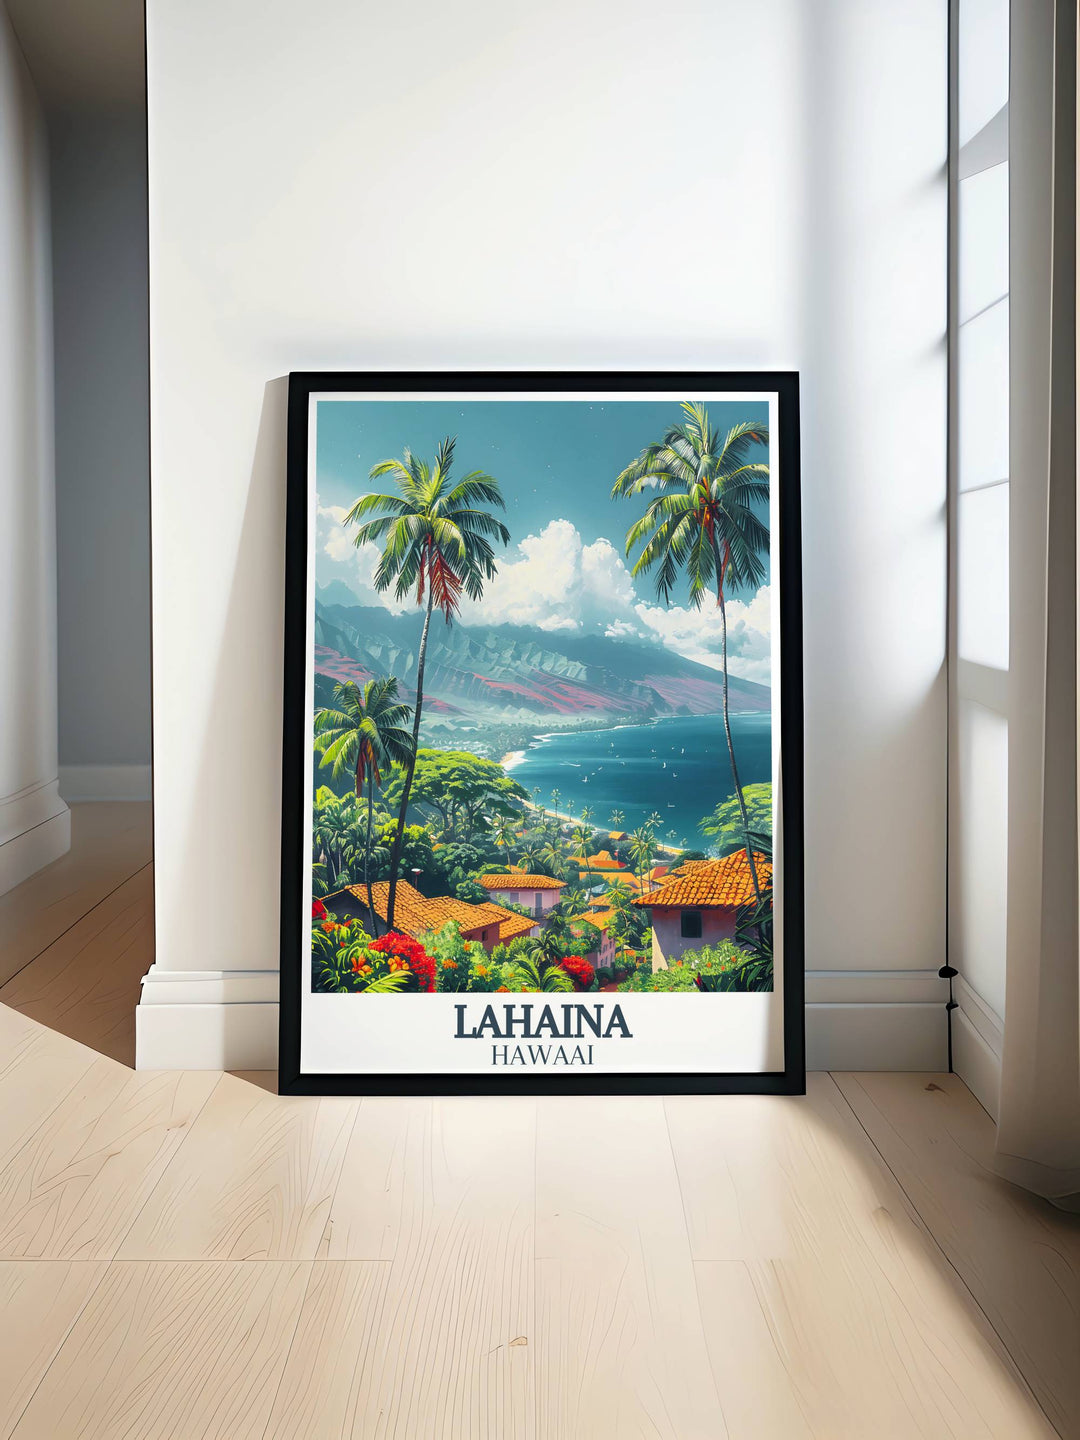 Panoramic view of Lahaina waterfront with its calm blue waters and distant mountain views, capturing the essence of this historic Maui town.